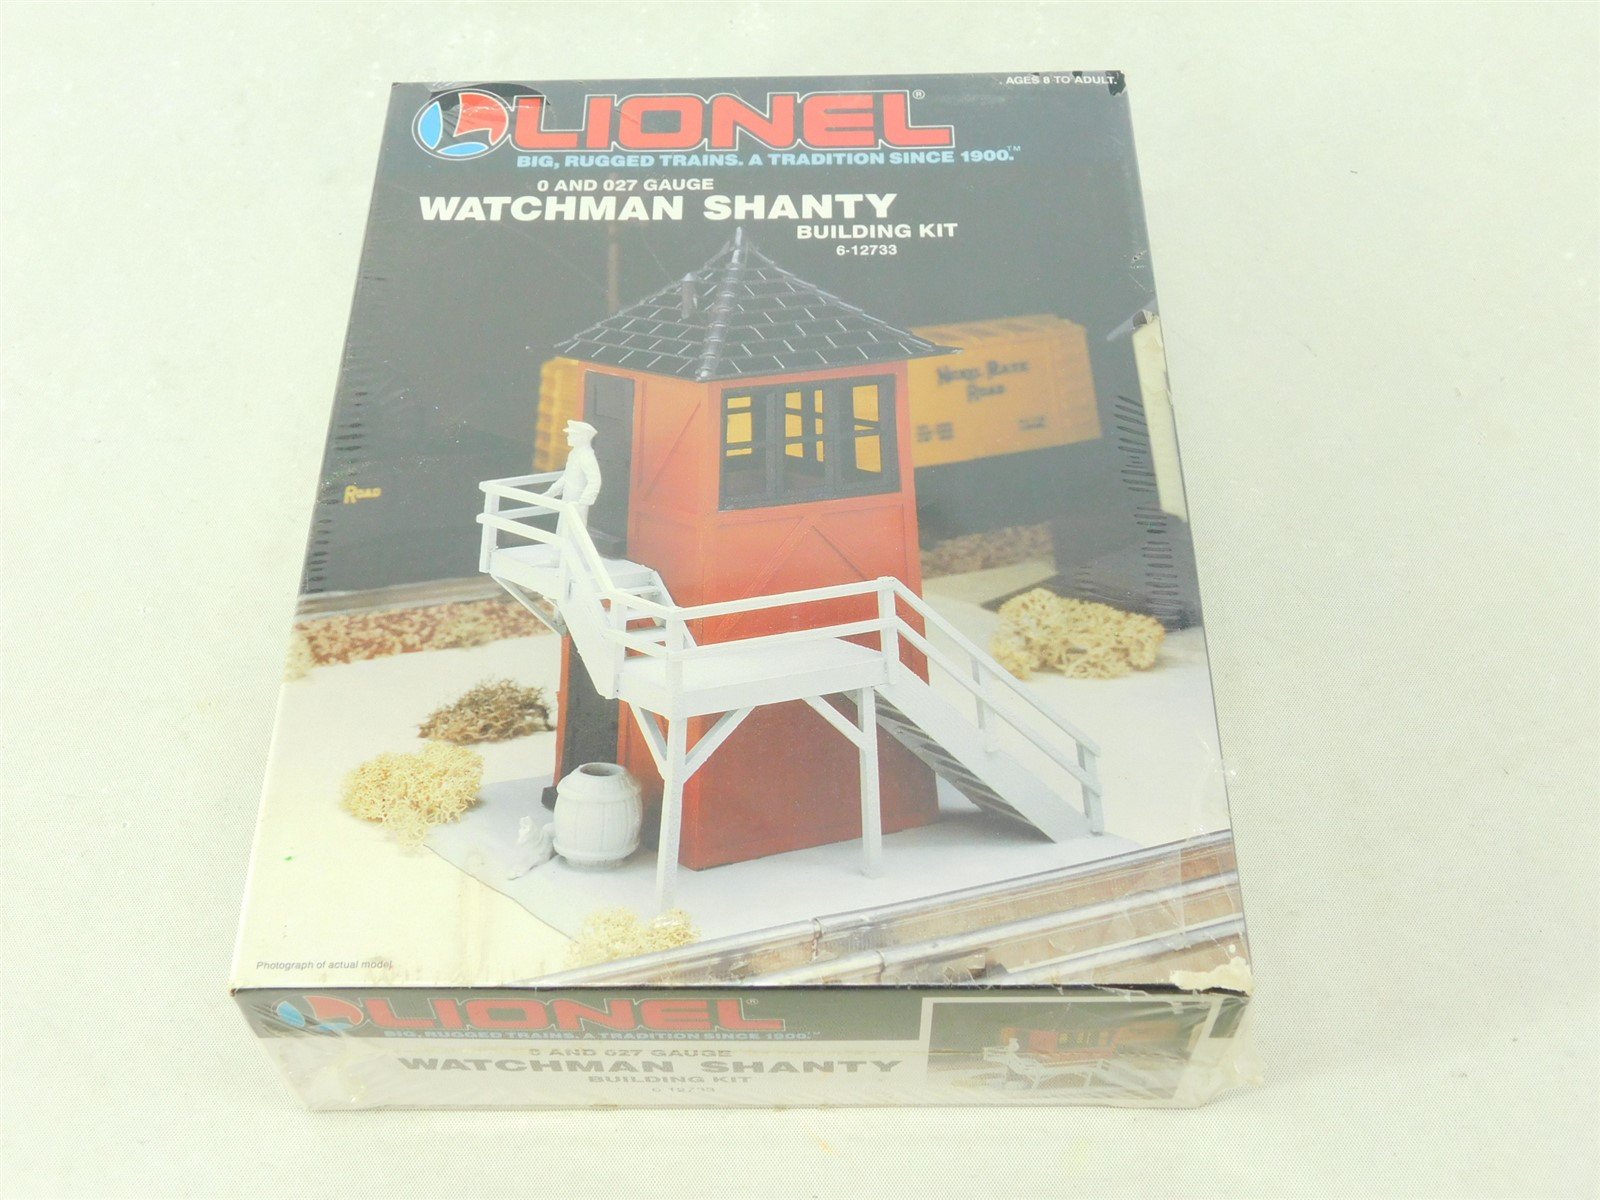 O 1/48 Scale Lionel Kit #6-12733 Watchman Shanty Building - Sealed